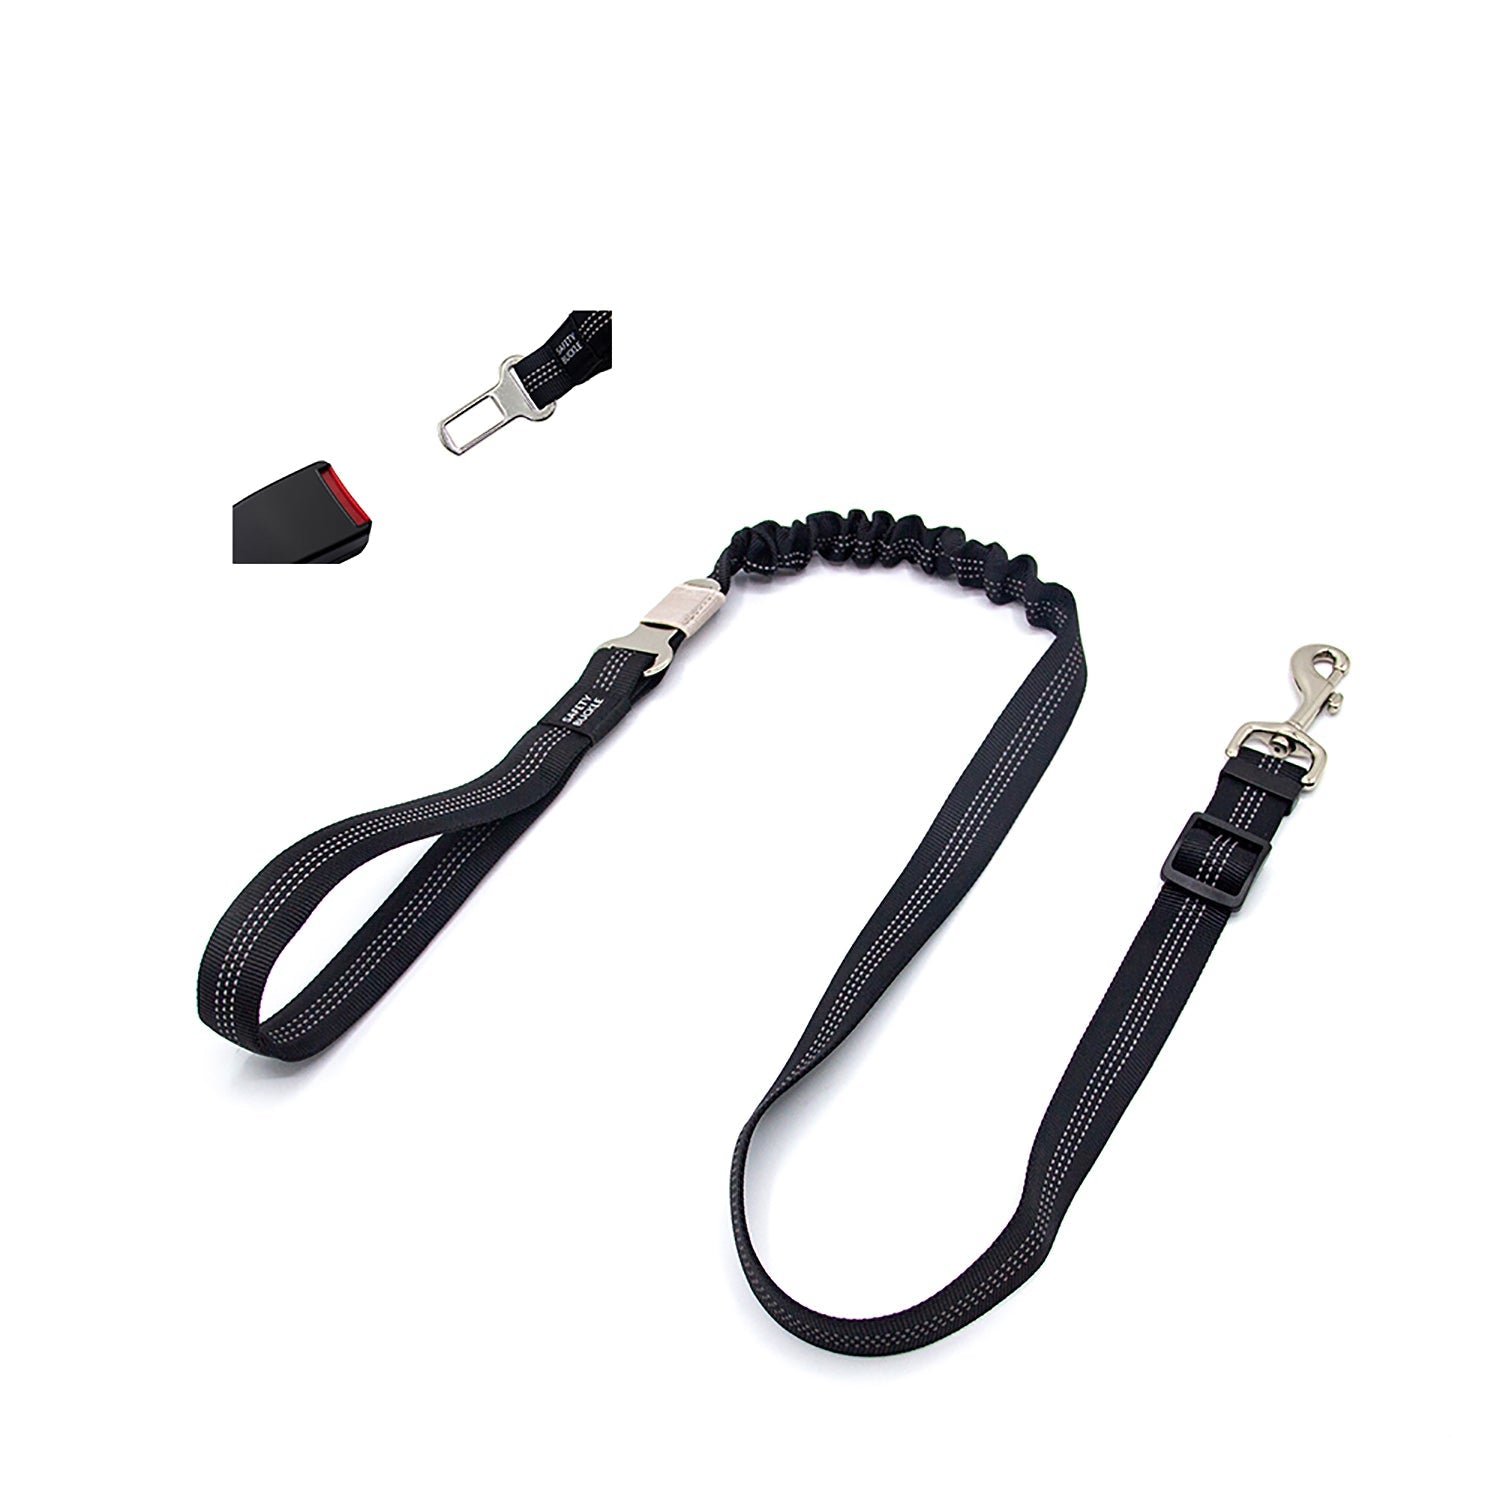 Dog leash with safety belt, with elastic shock absorption and strong carabiner